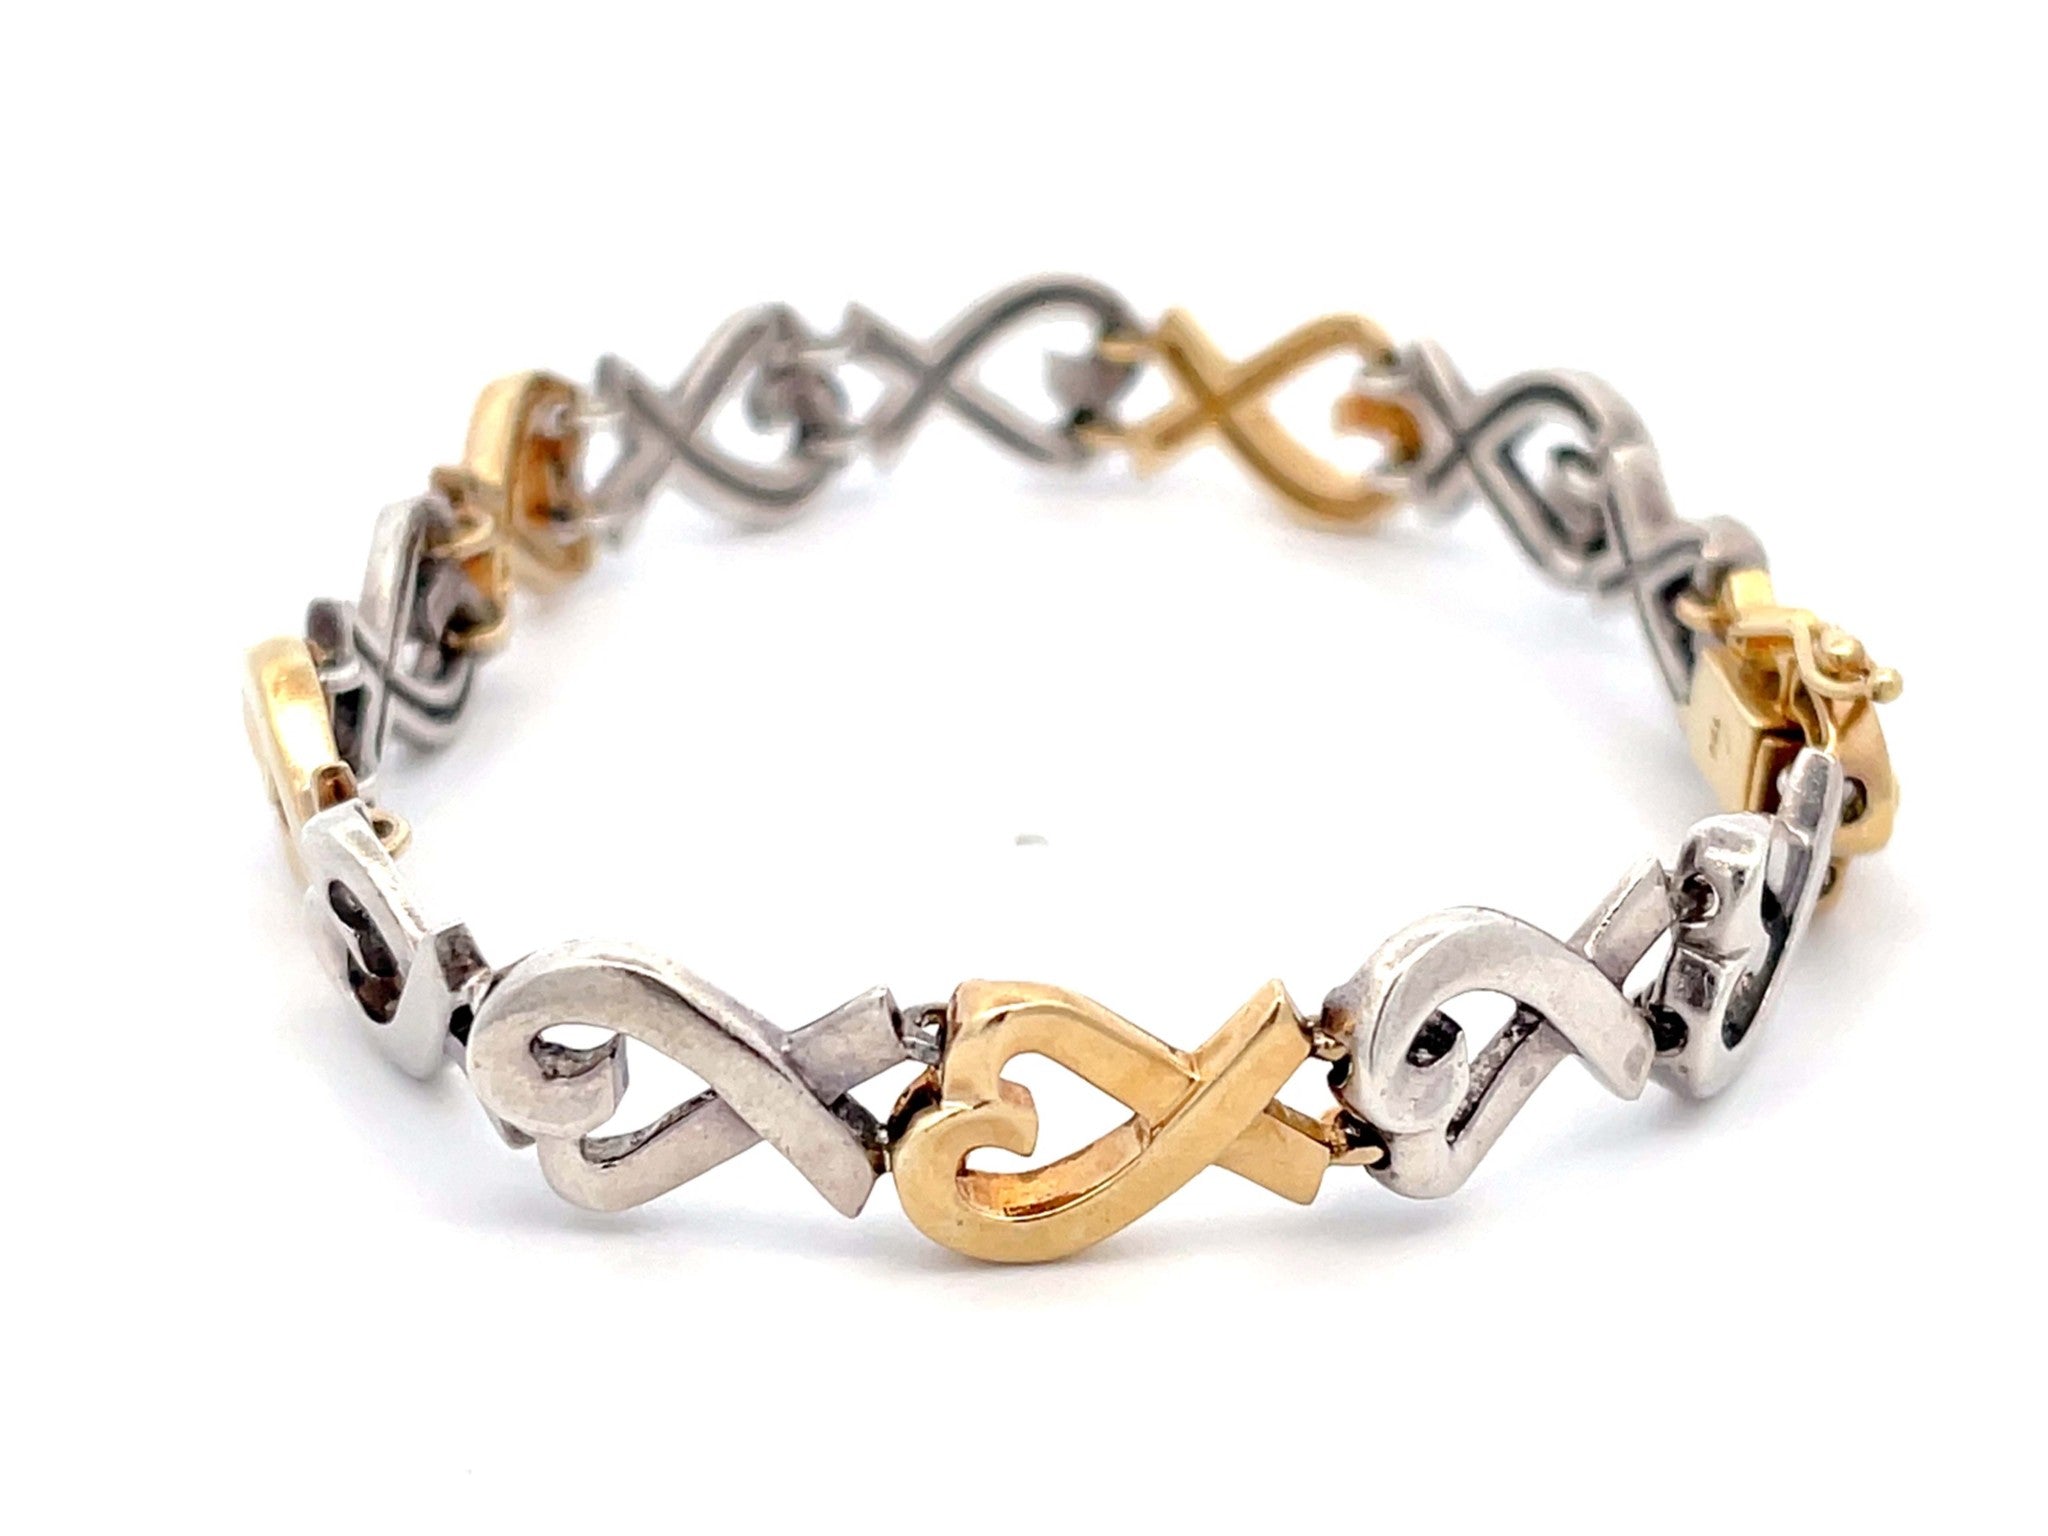 Tiffany and Co. Loving Heart Bracelet Sterling Silver and 18k Yellow Gold